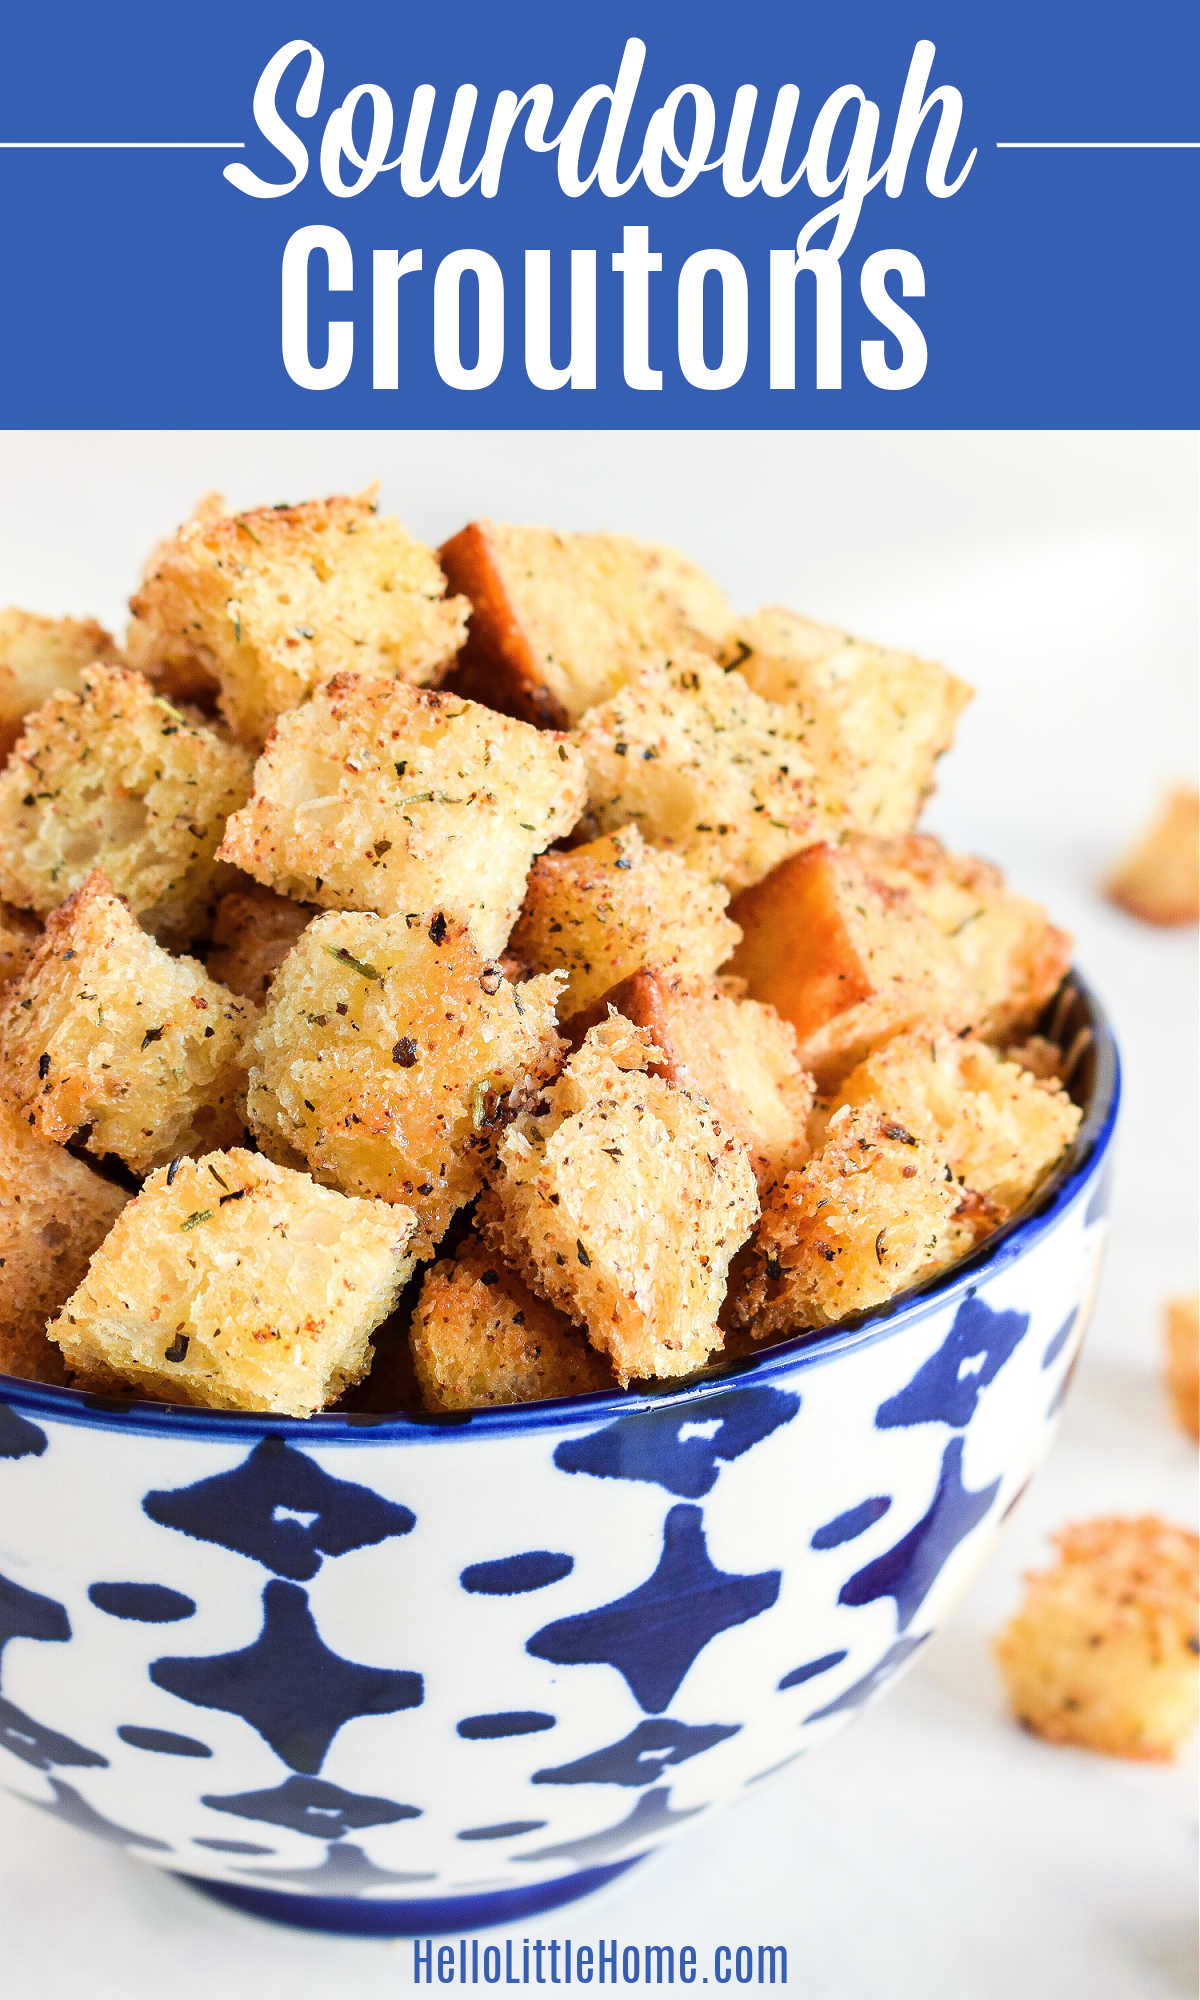 Close up of sourdough croutons in a blue patterned bowl.